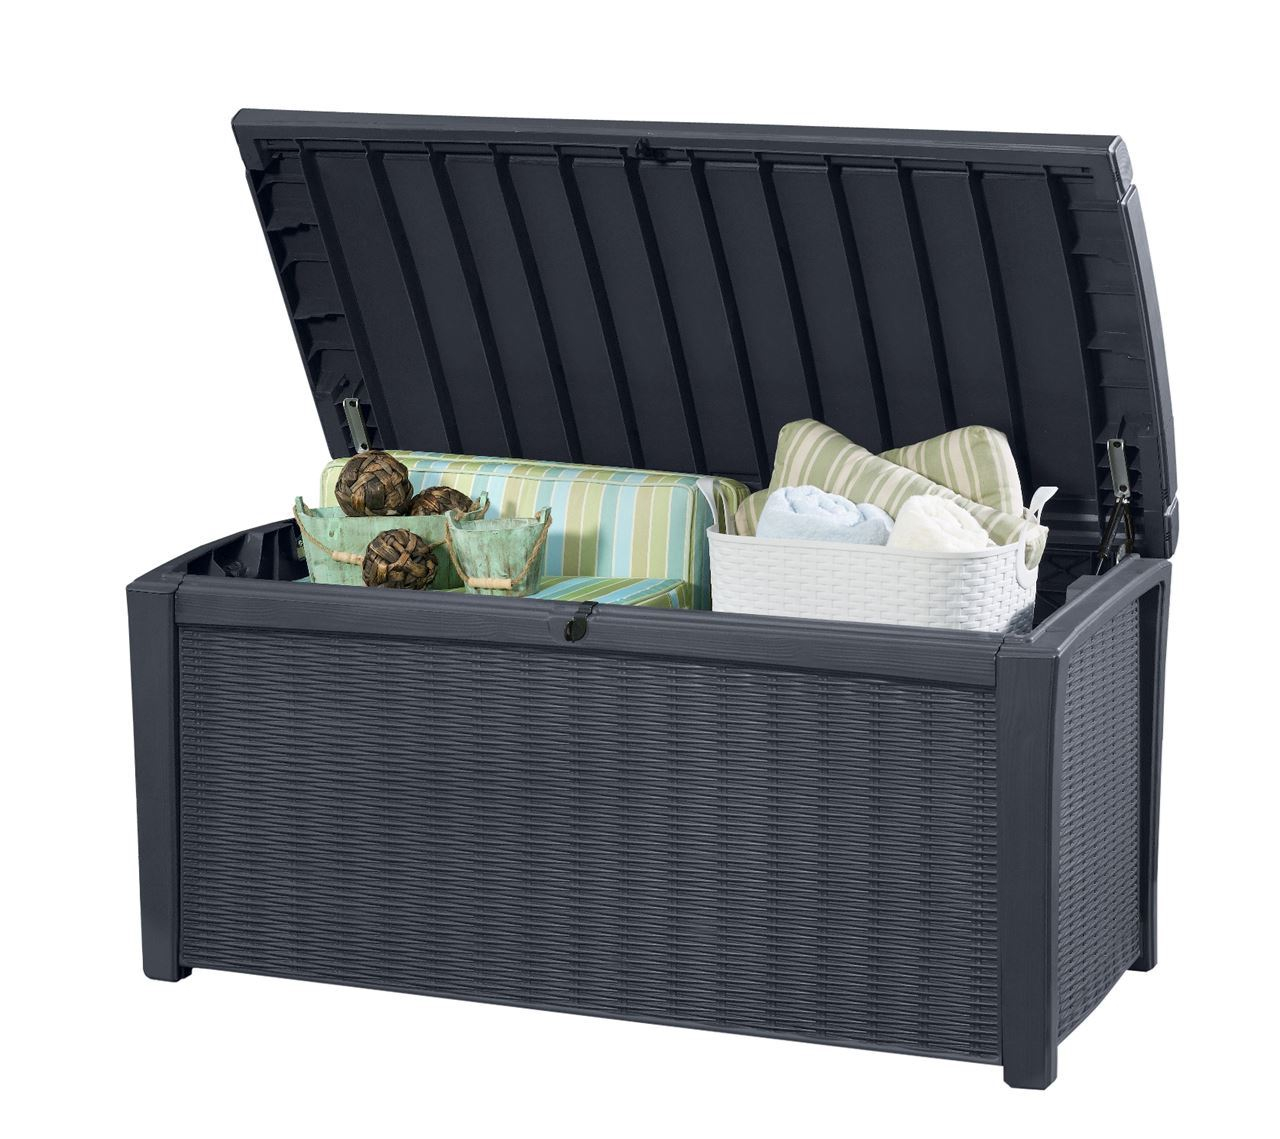 Outdoor Patio Wicker Storage Furniture Keter pertaining to dimensions 1280 X 1139